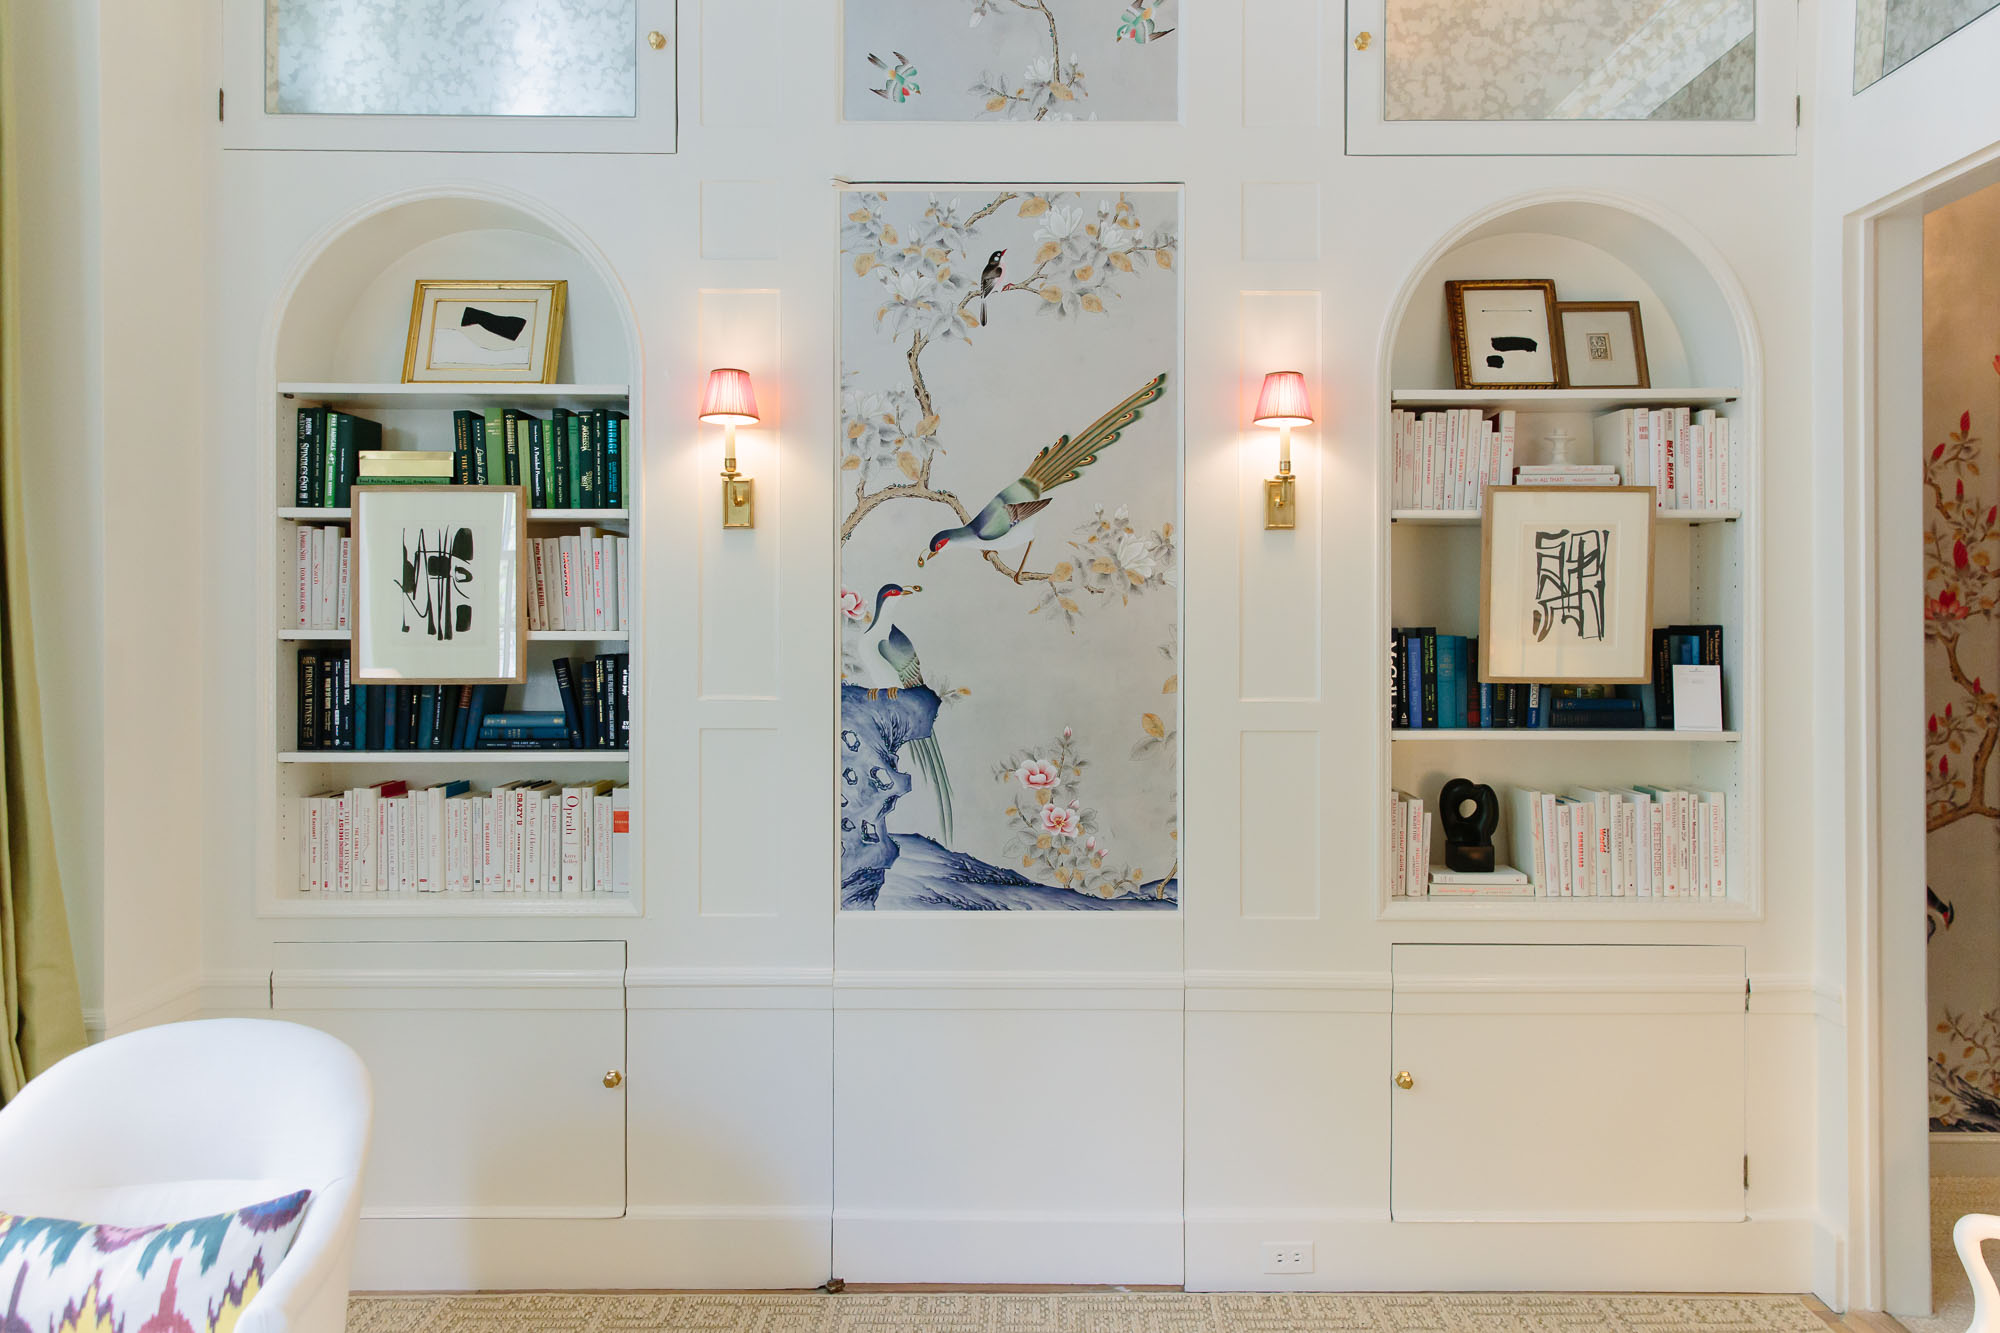 Kips Bay Decorator Showhouse featured by top US interior design blog York Avenue